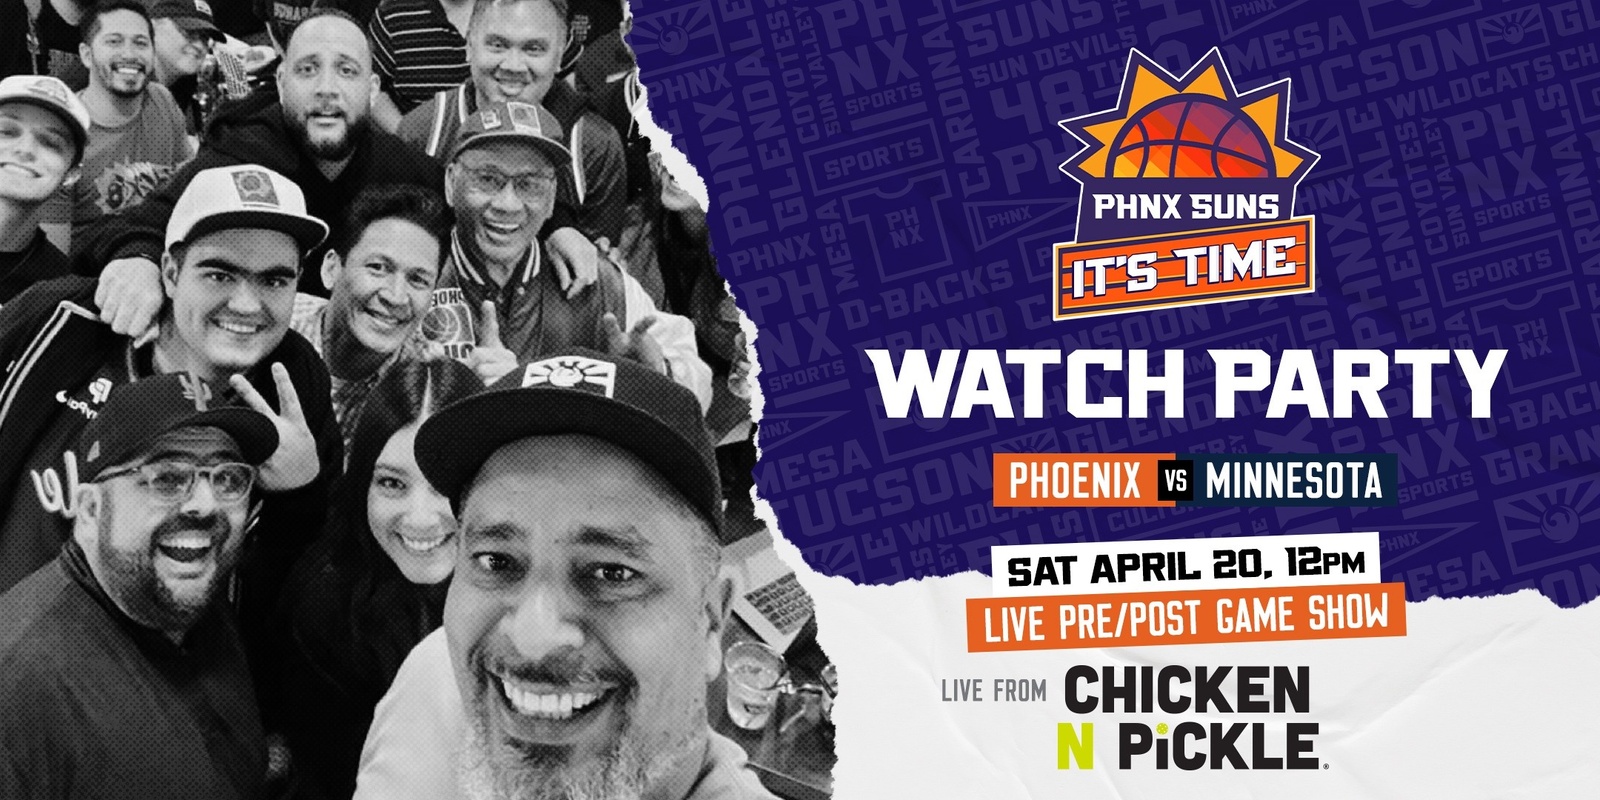 Banner image for PHNX Suns Playoff Watch Party and Live Show at Chicken N Pickle 